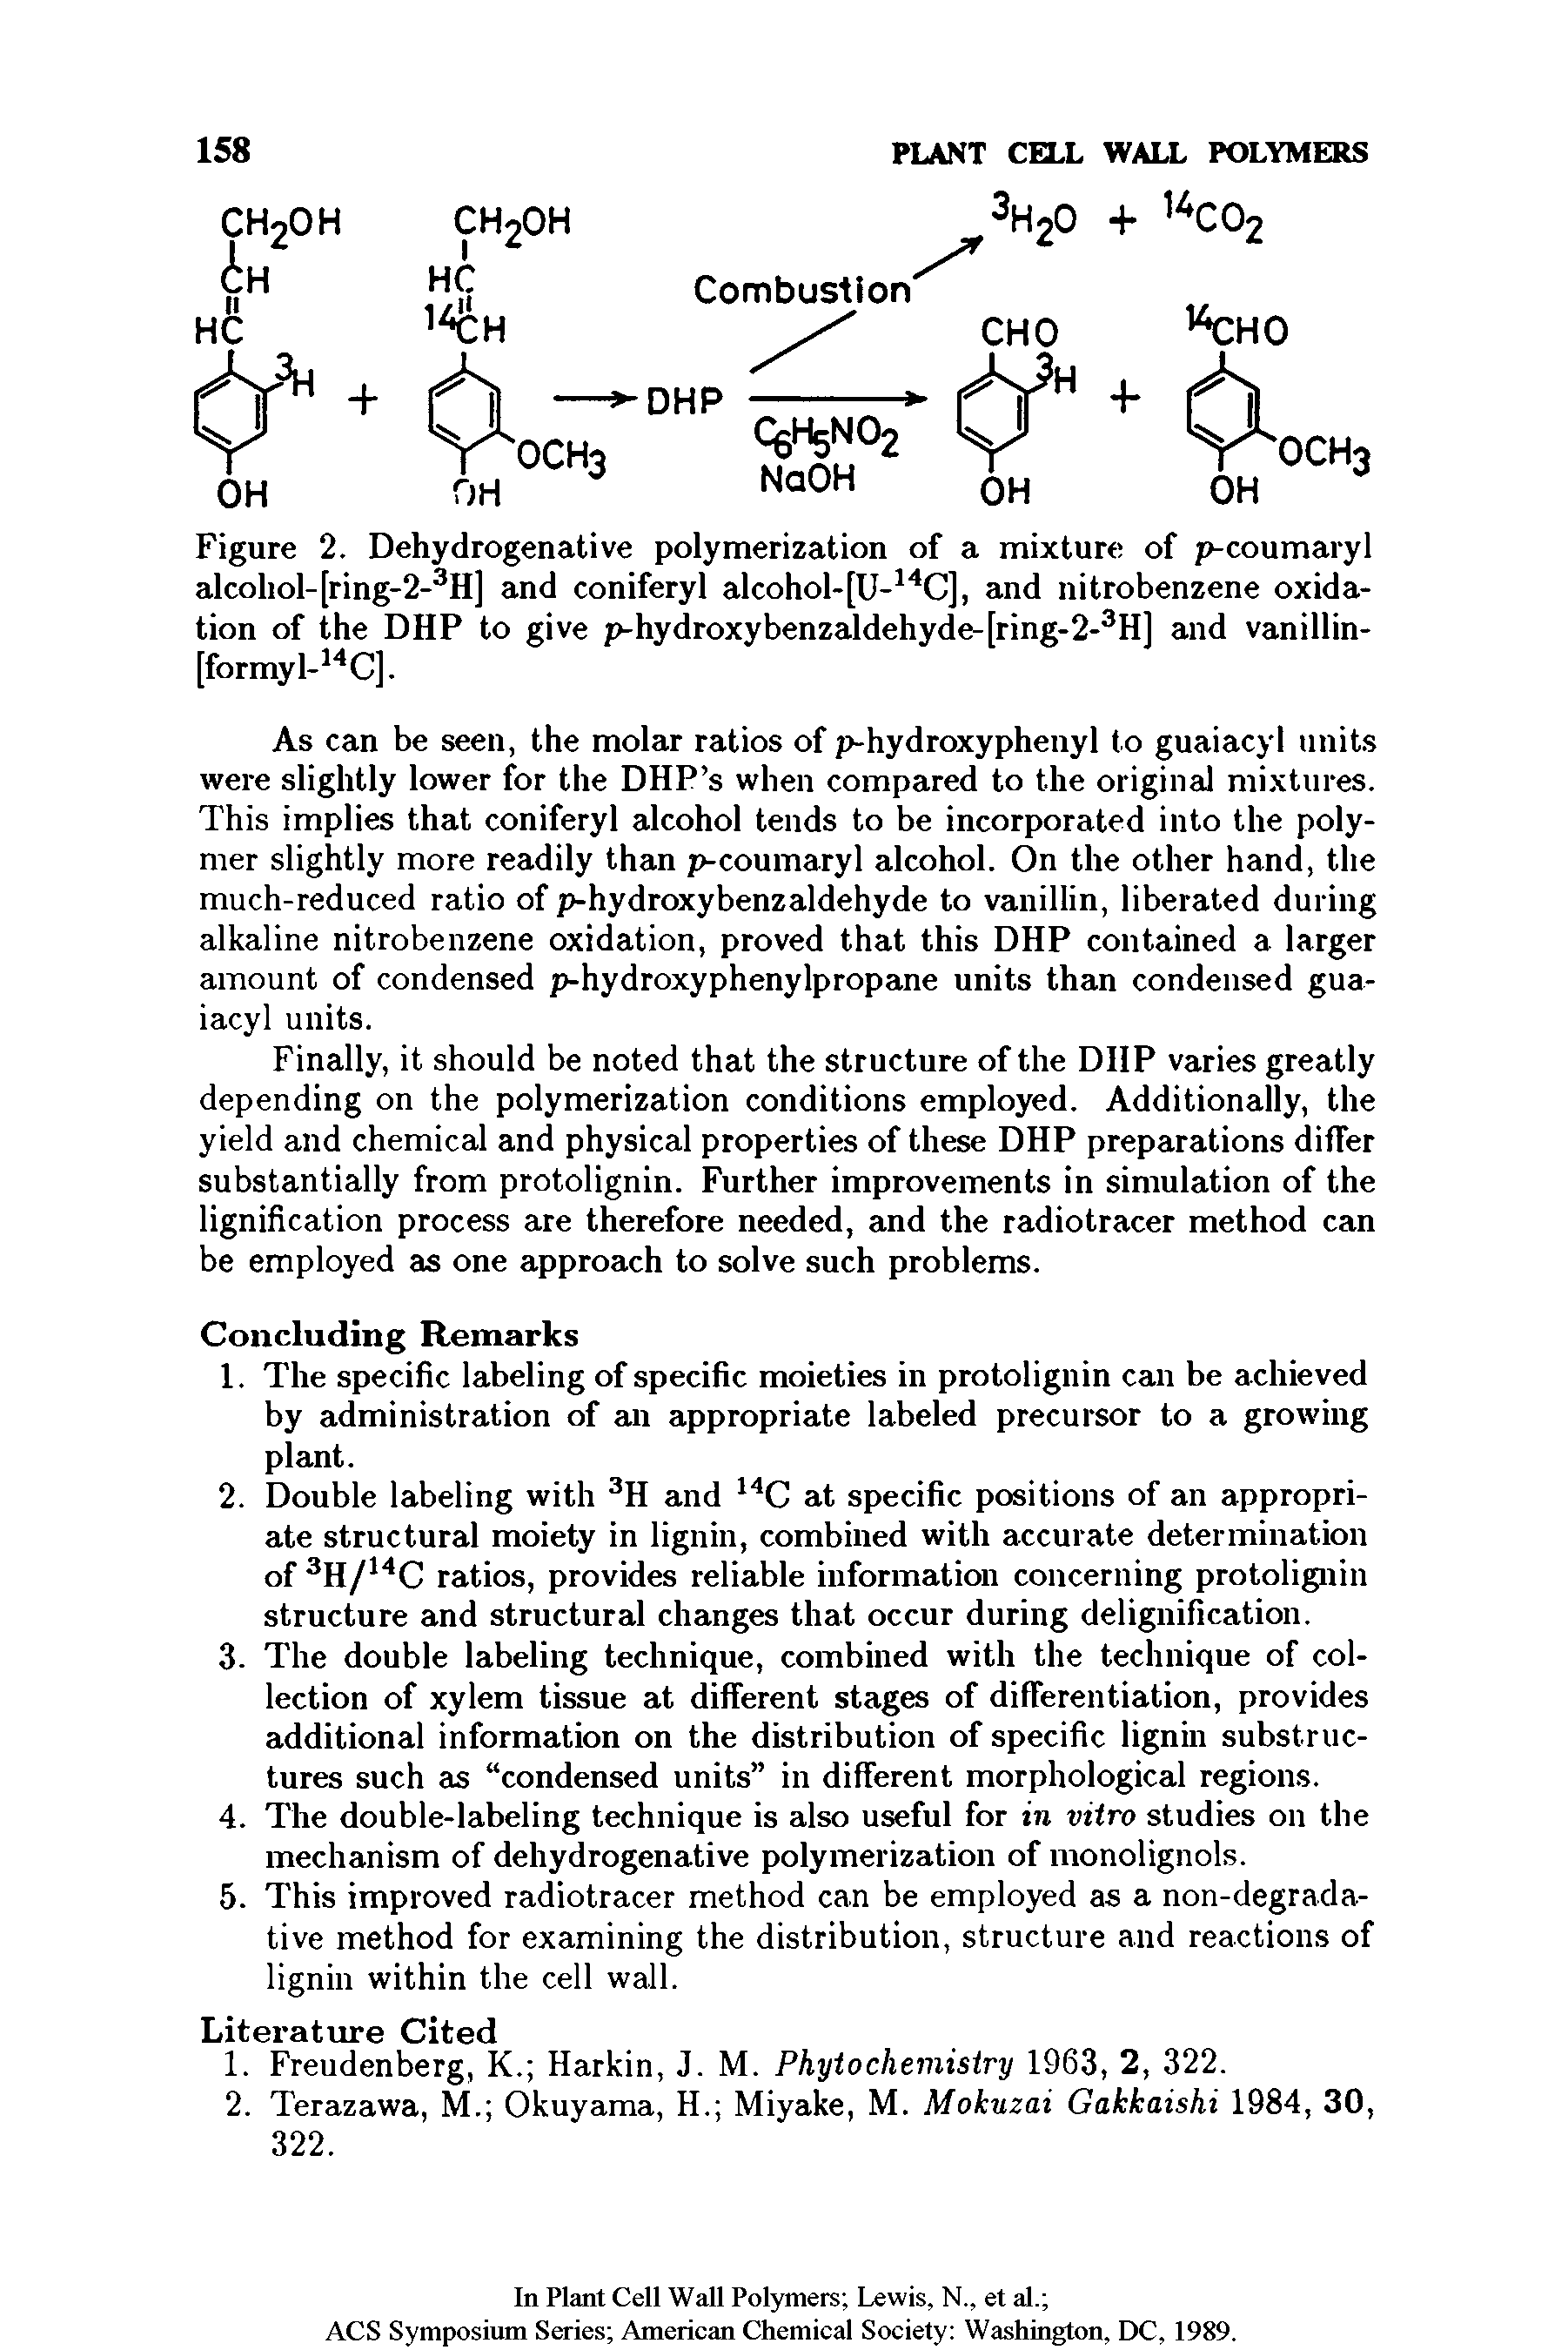 Figure 2. Dehydrogenative polymerization of a mixture of p-coumaryl alcohol-[ring-2-3H] and coniferyl alcohol-[U-14C], and nitrobenzene oxidation of the DHP to give p-hydroxybenzaldehyde-[ring-2-3H] and vanillin-[formyl-14C].